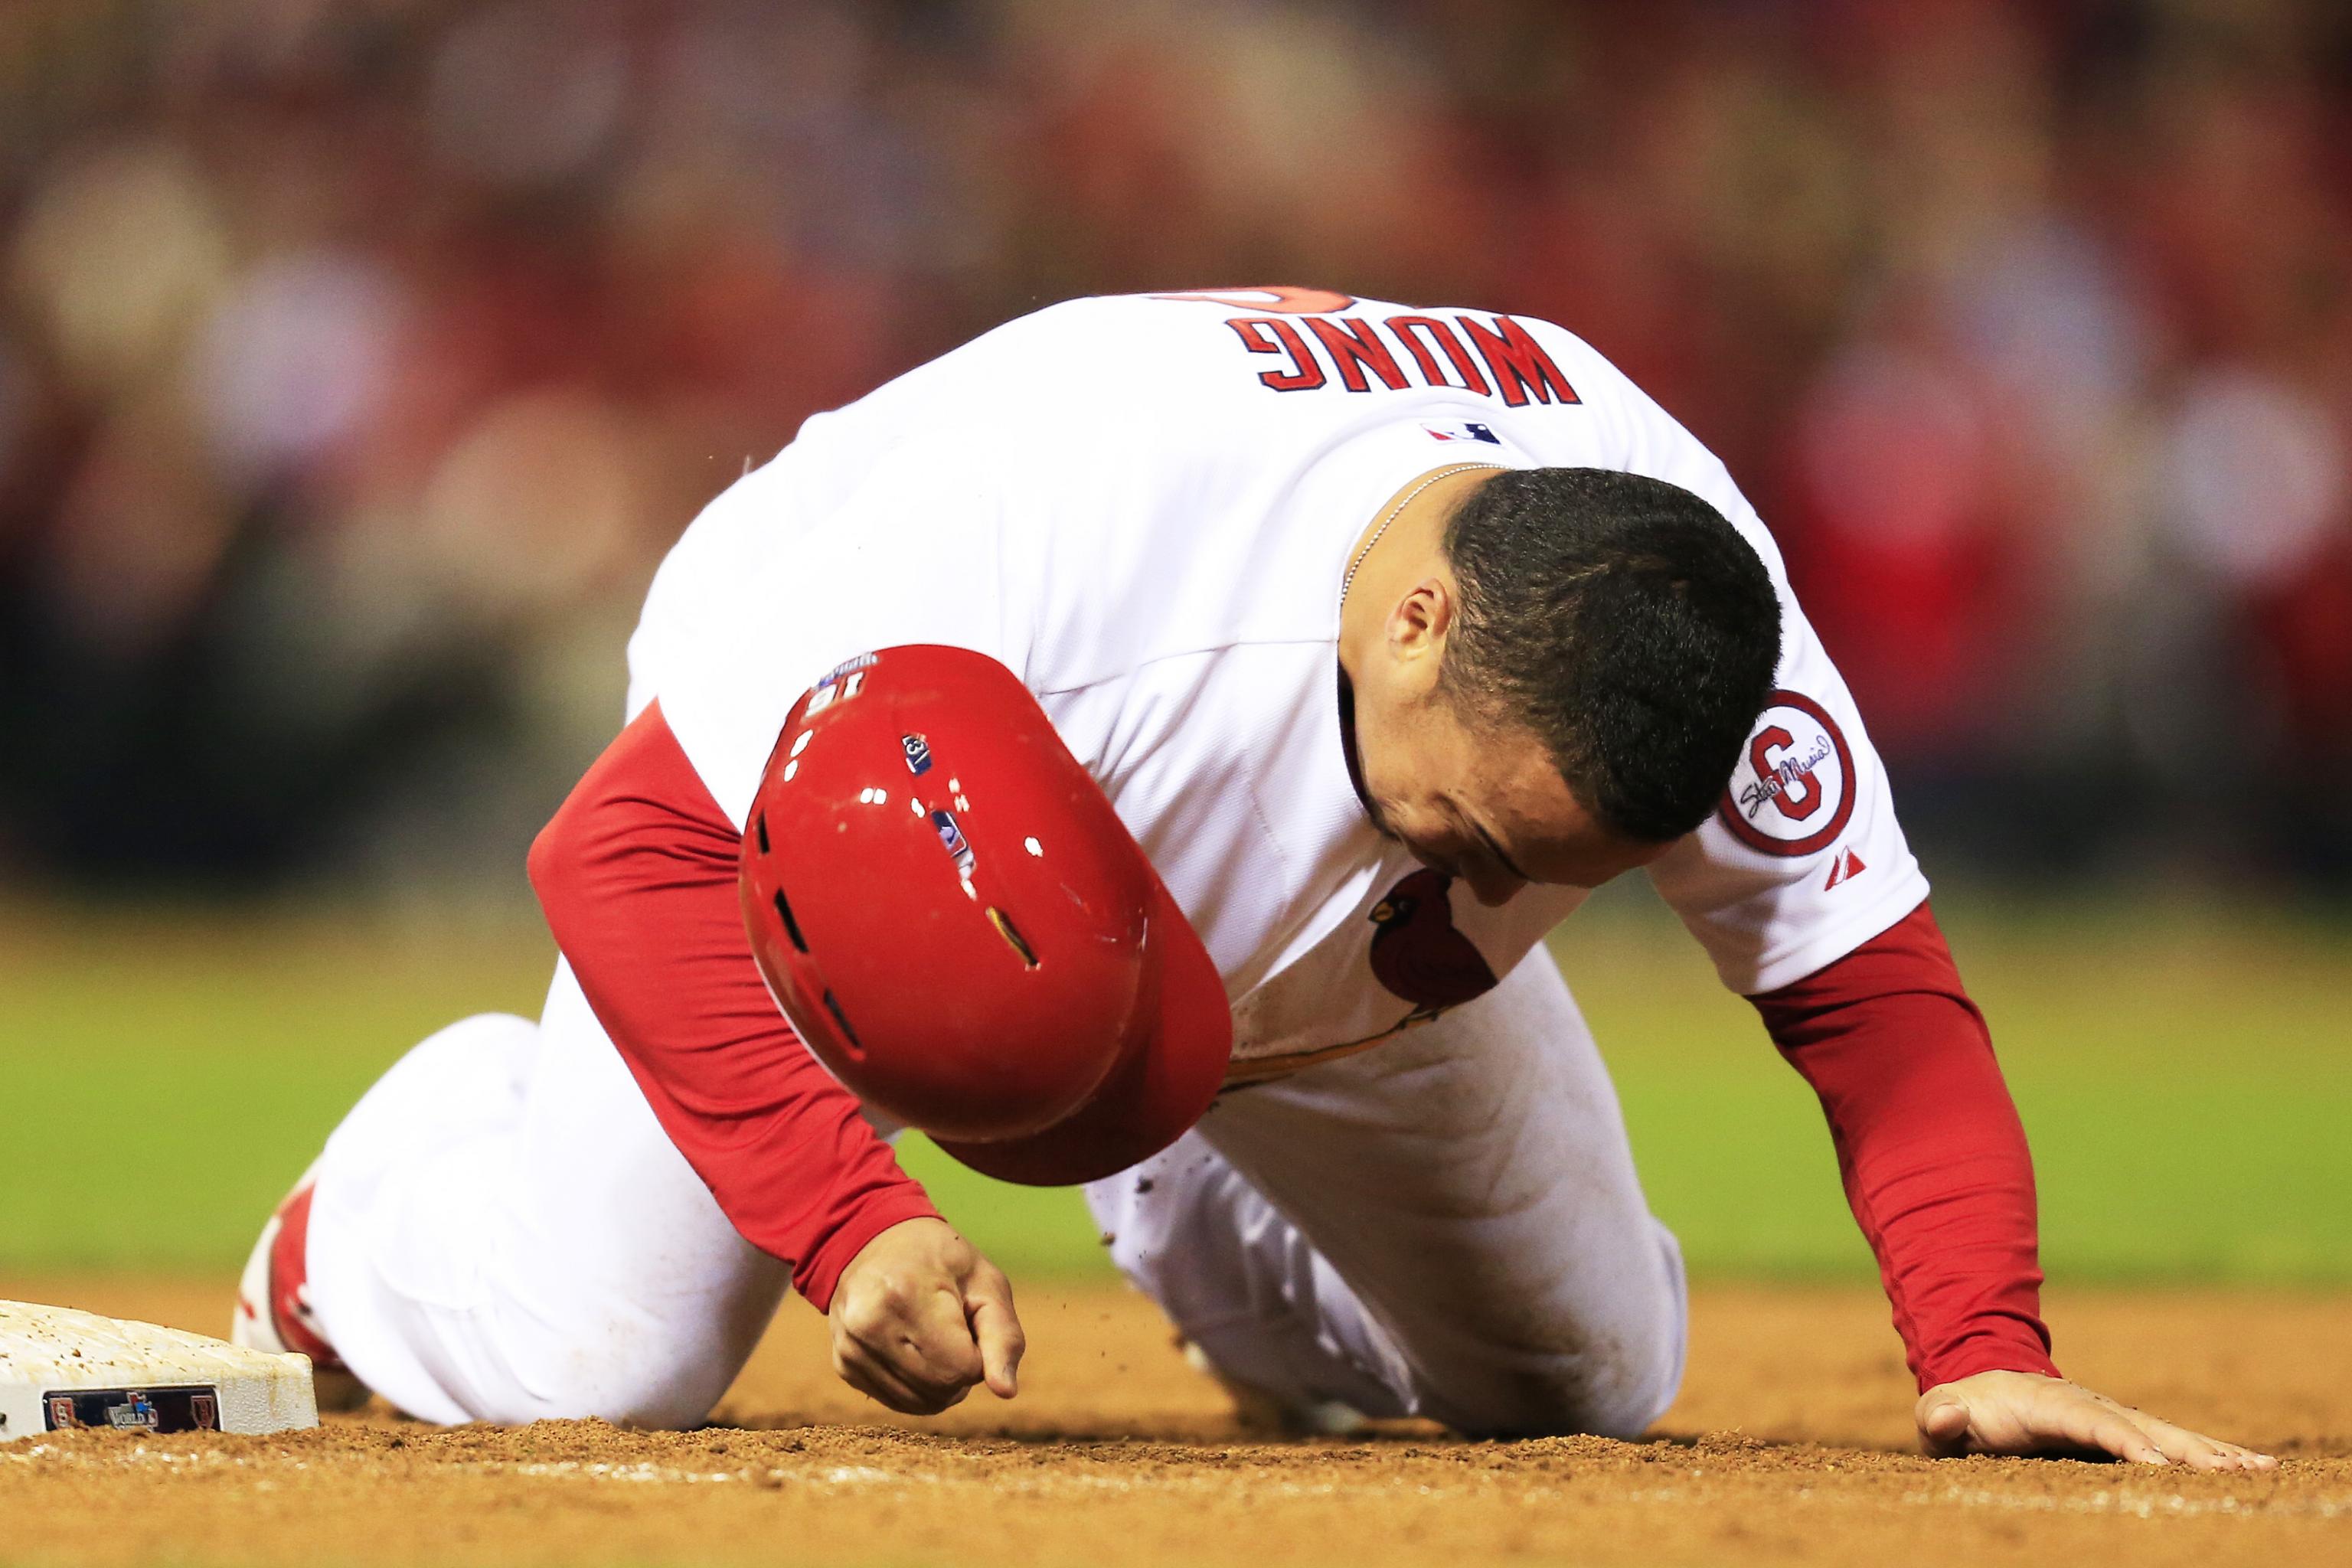 Cardinals 2020 Player Preview: Kolten Wong Looks to Repeat a